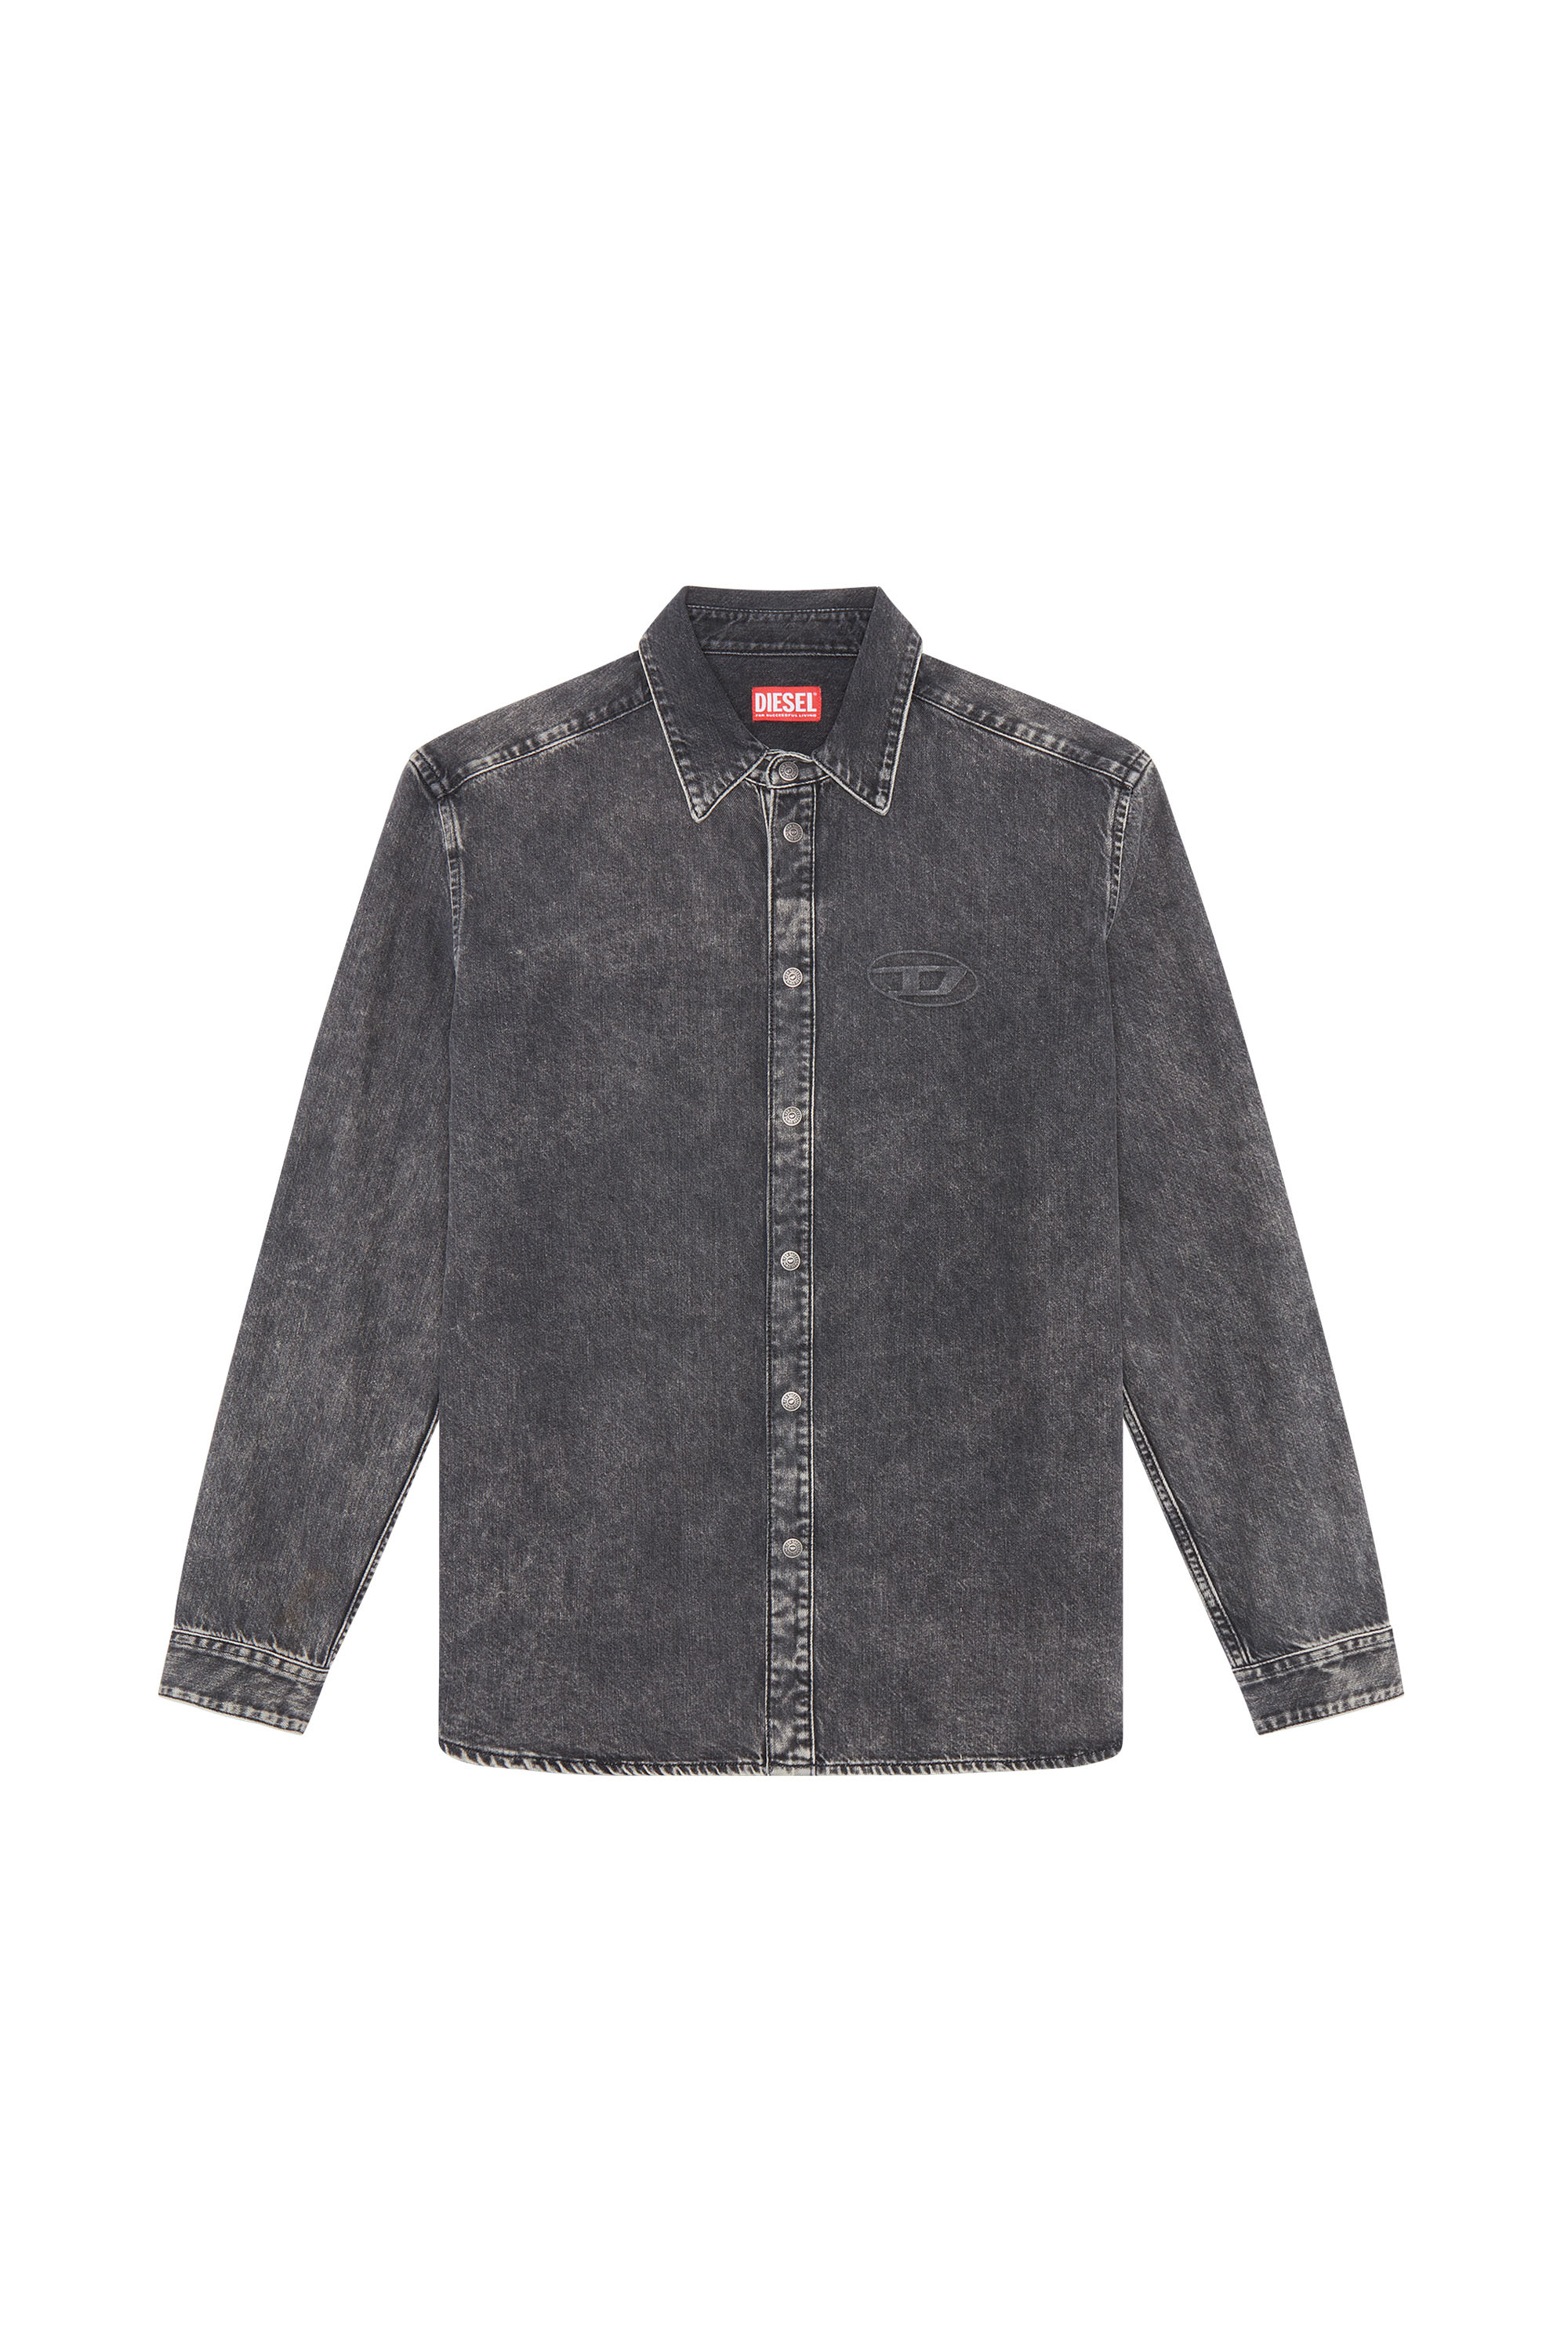 Diesel - D-SIMPLY, Negro/Gris oscuro - Image 6